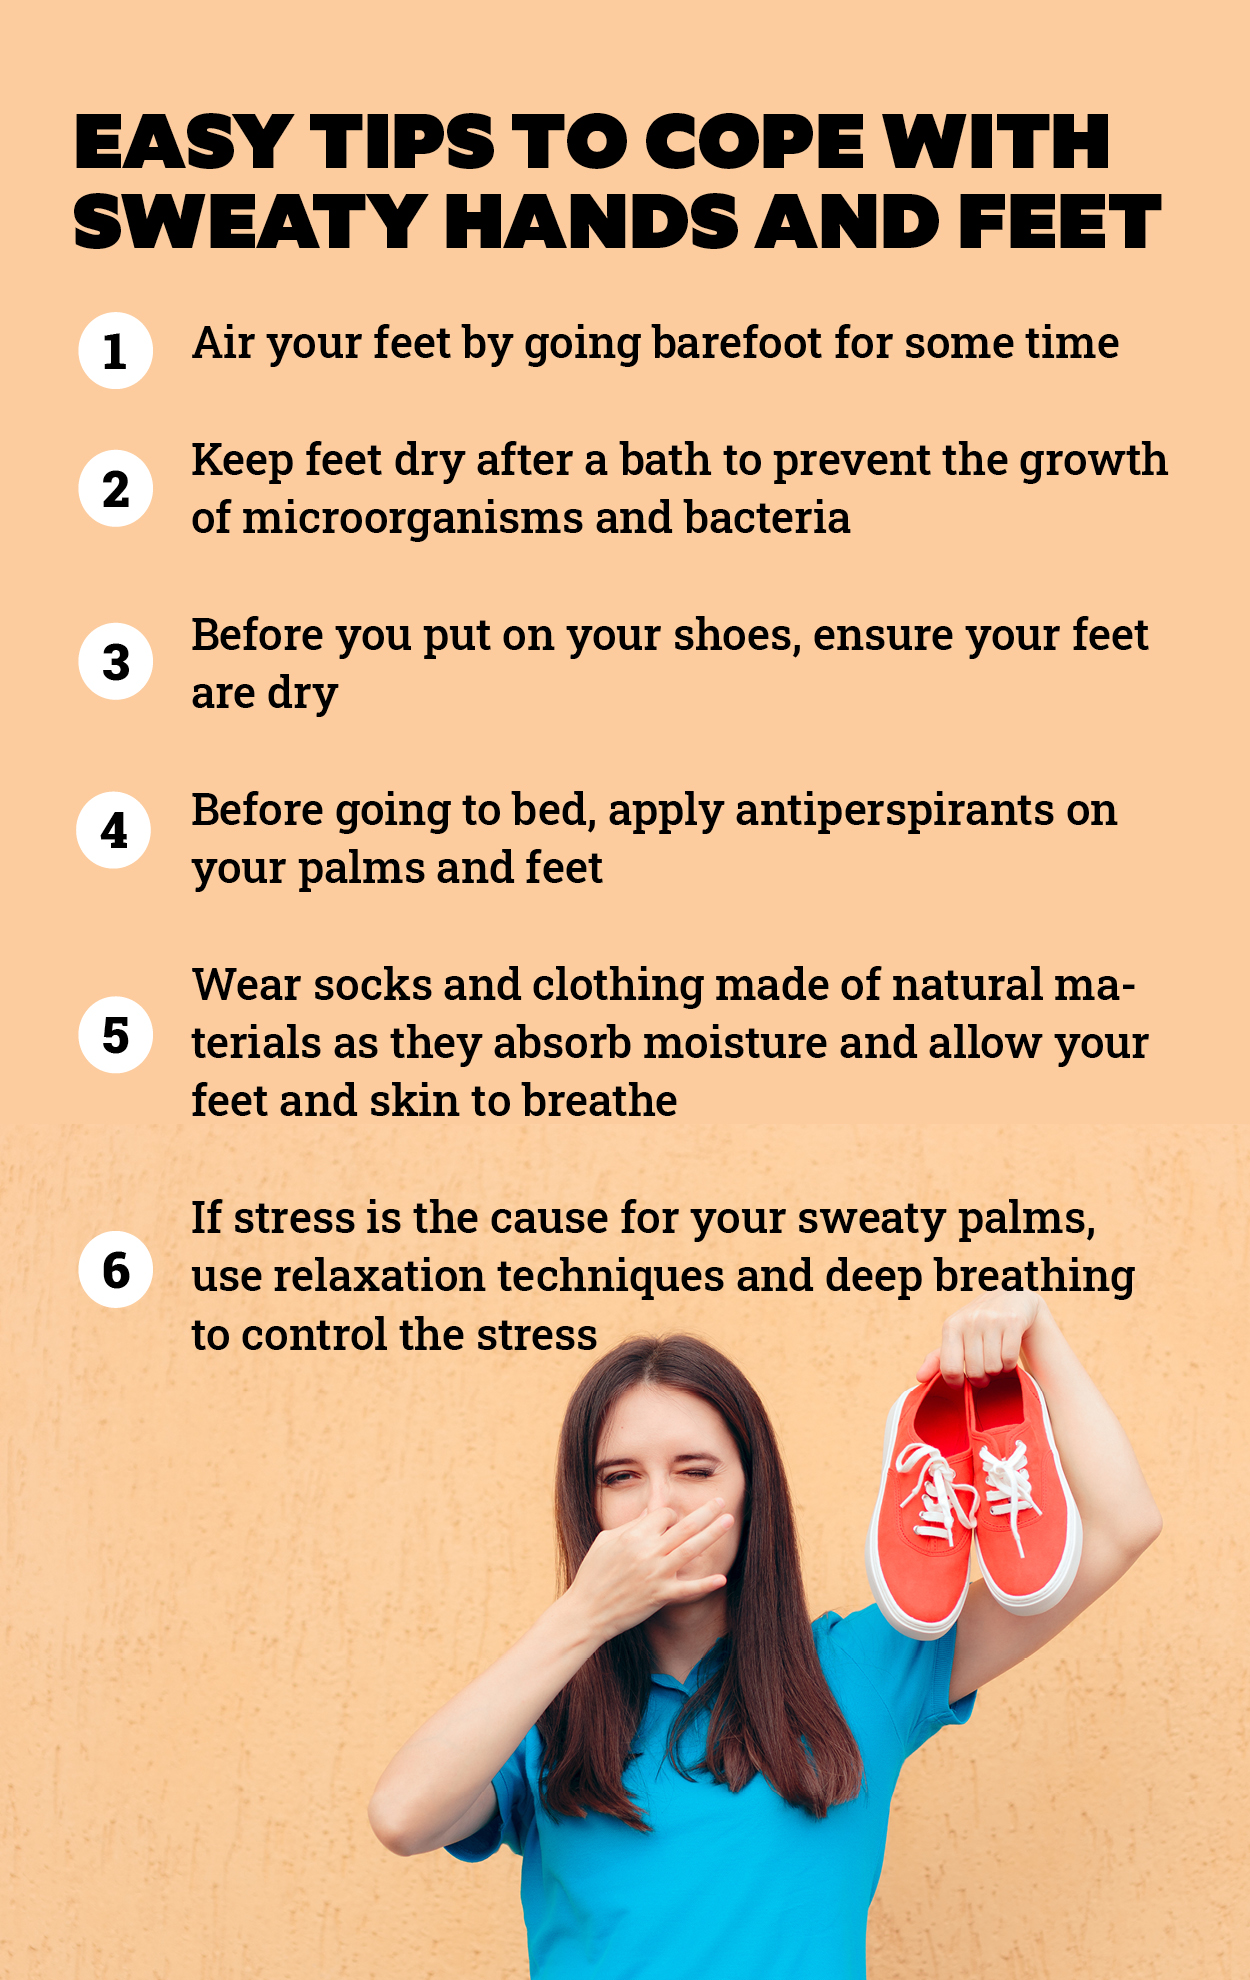 How to cure the problem of cold feet and palms in winter - The